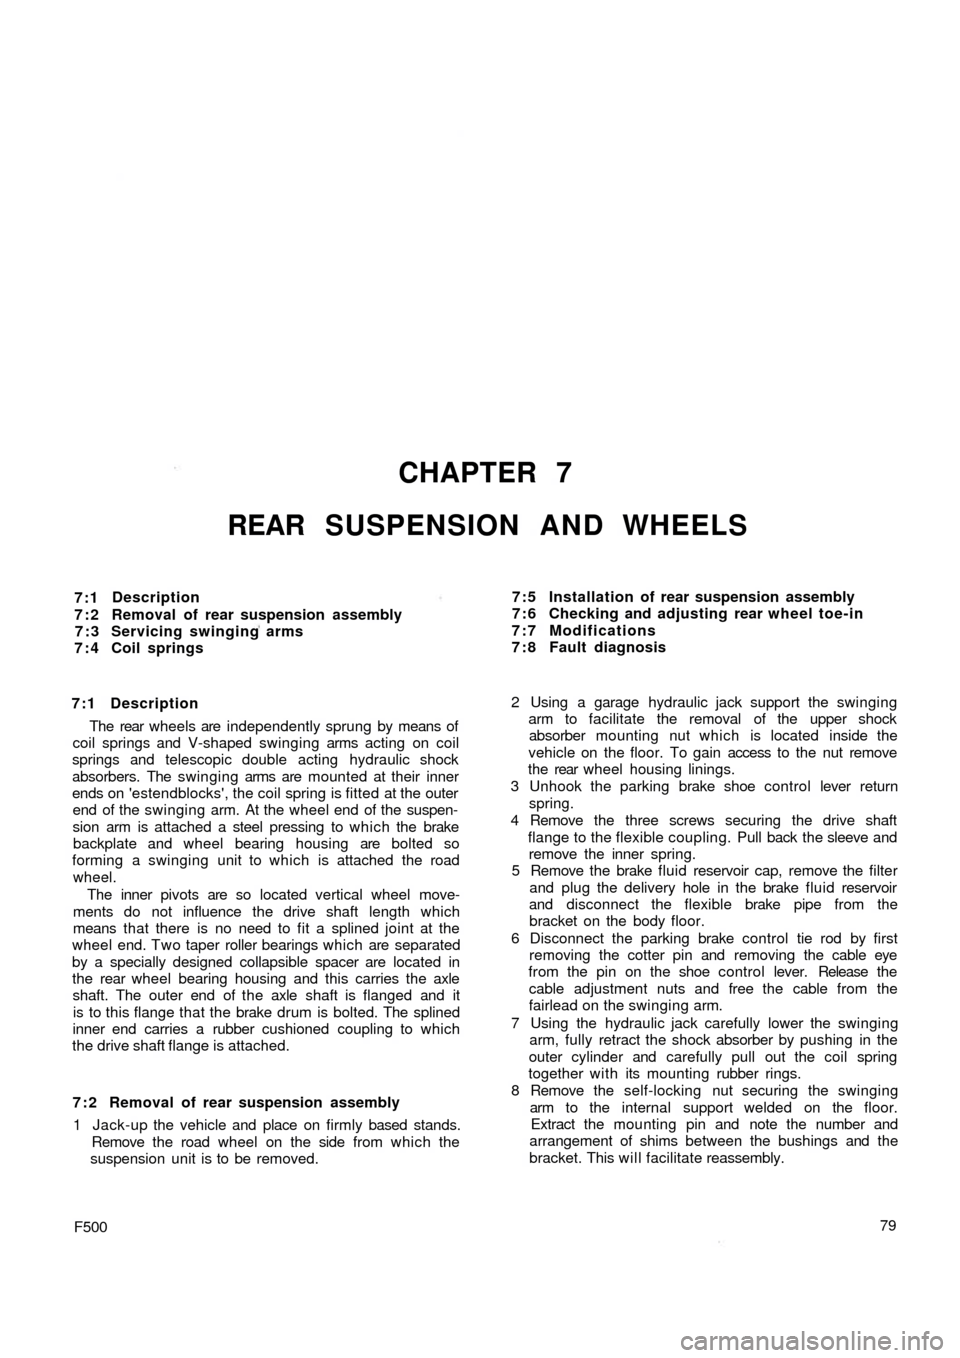 FIAT 500 1971 1.G Workshop Manual CHAPTER 7
REAR SUSPENSION AND WHEELS
7:1
7:2
7:3
7:4Description
Removal of rear suspension assembly
Servicing swinging arms
Coil springs
7:1 Description
The  rear  wheels are independently sprung by m